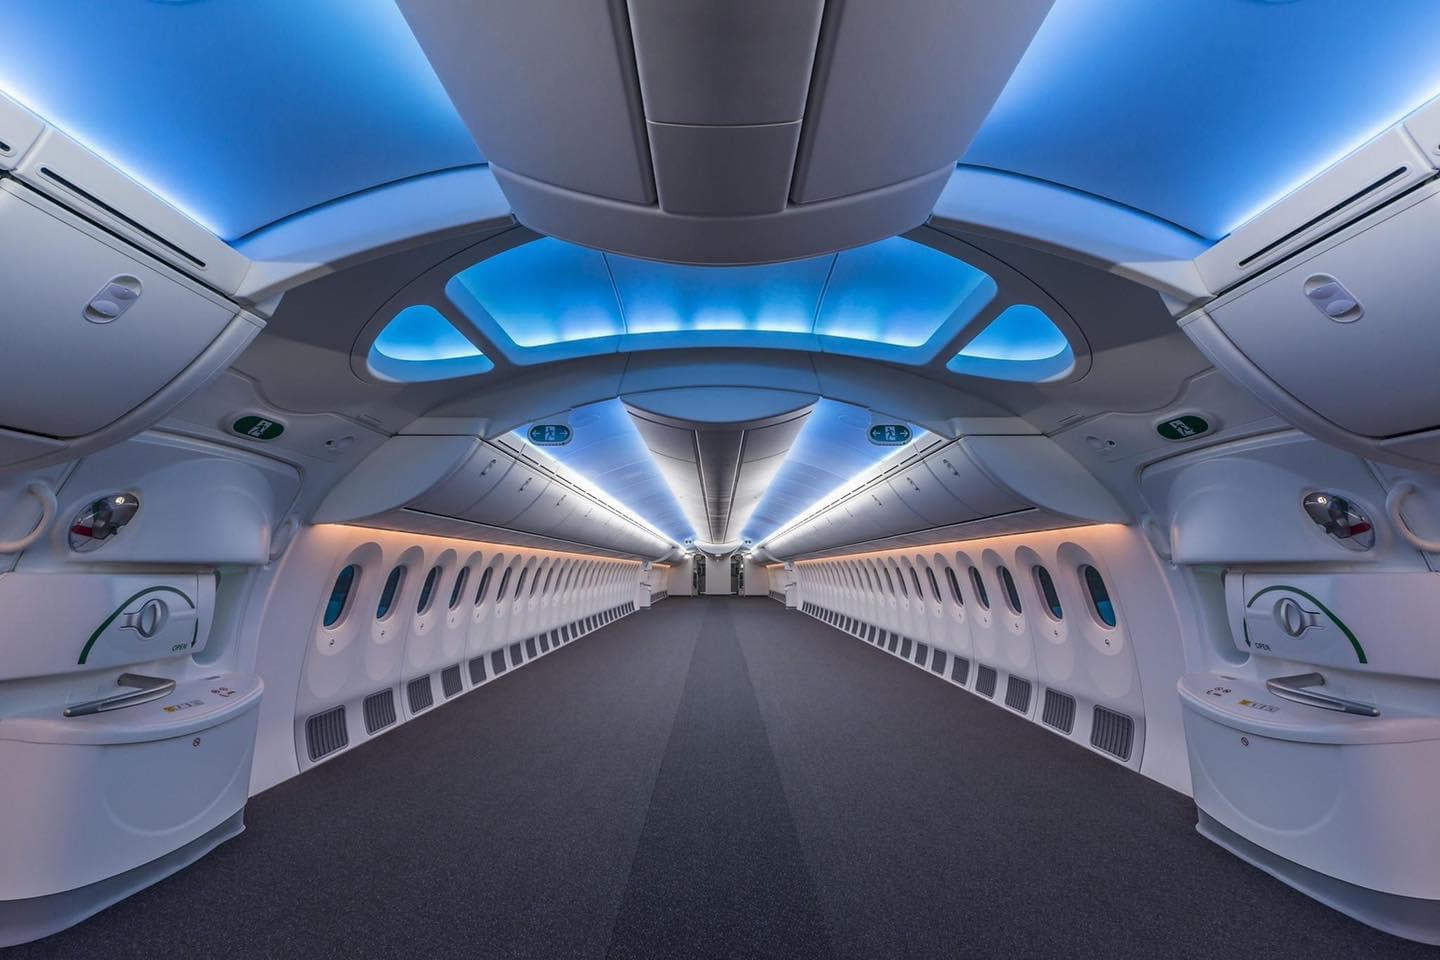 Inside of an empty Boeing 787. So much room for activities!